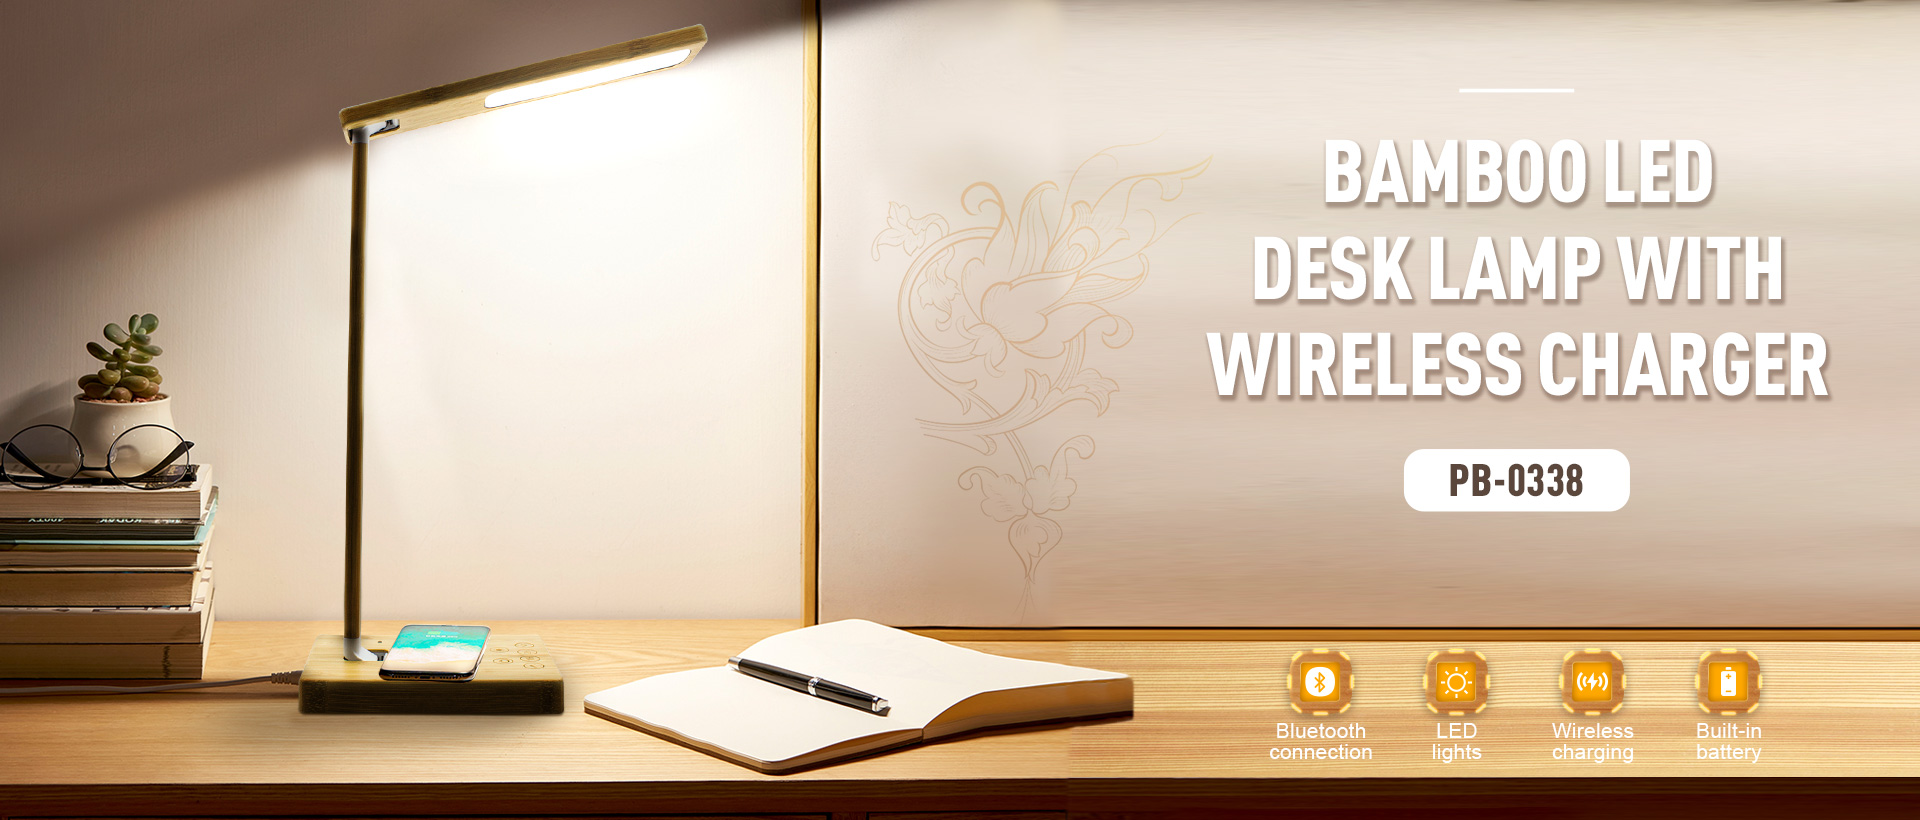 Bamboo LED Desk Lamp with Wireless Charger